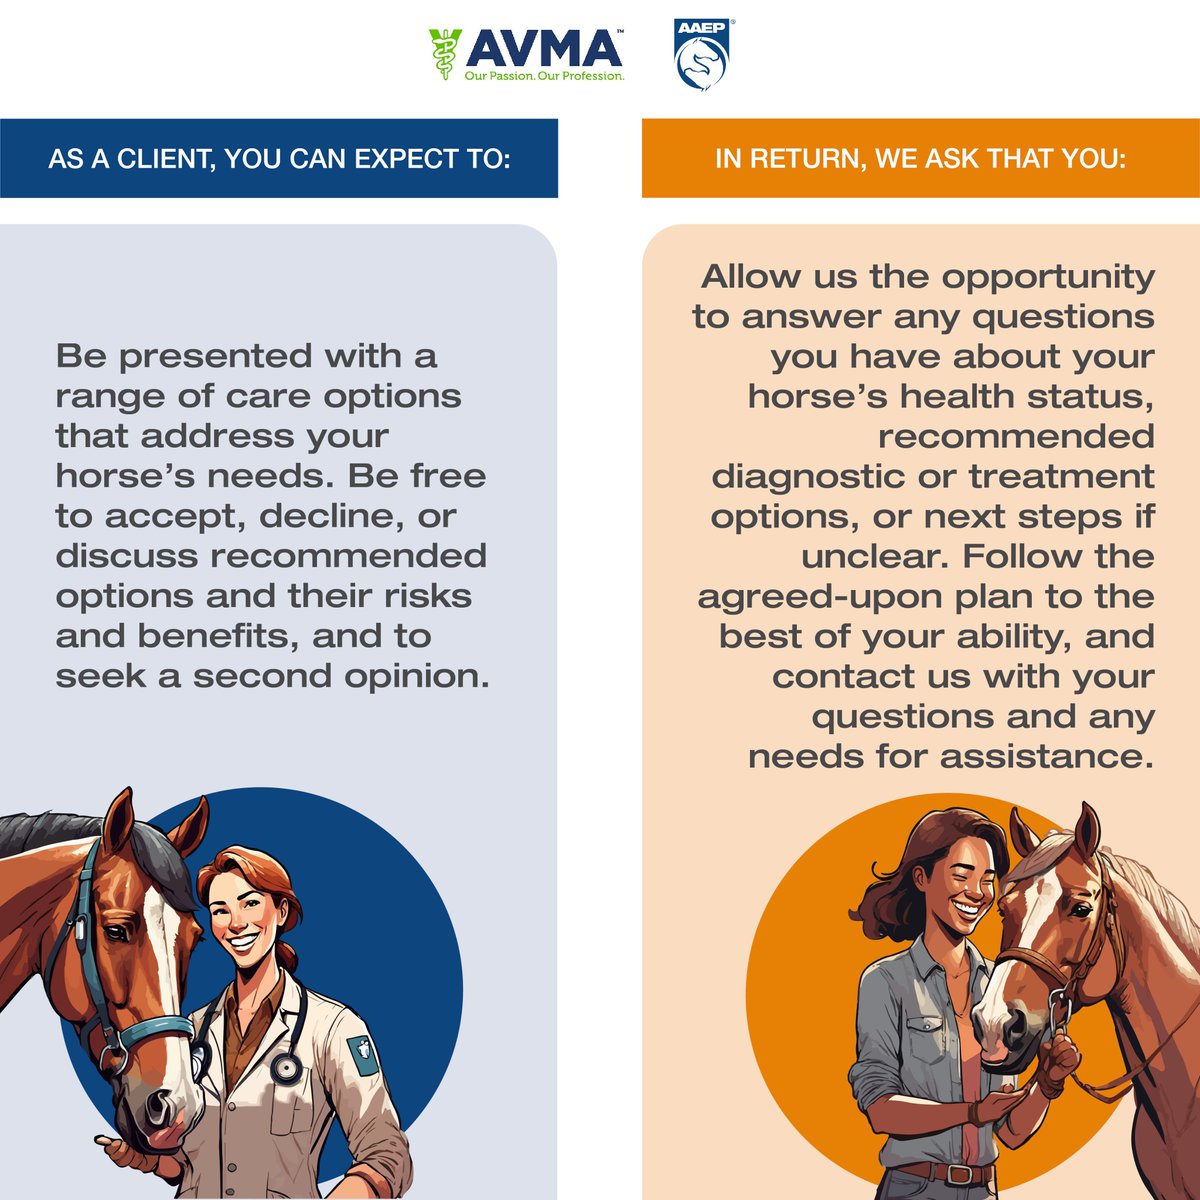 Today, in honor of #WorldHorseDay, we're thrilled to announce the release of the Effective Equine Care Guide, a resource meant to foster better communication and better care for horses. Read more about this collaborative effort by @AVMAvets and AAEP at aaep.org/node/38241